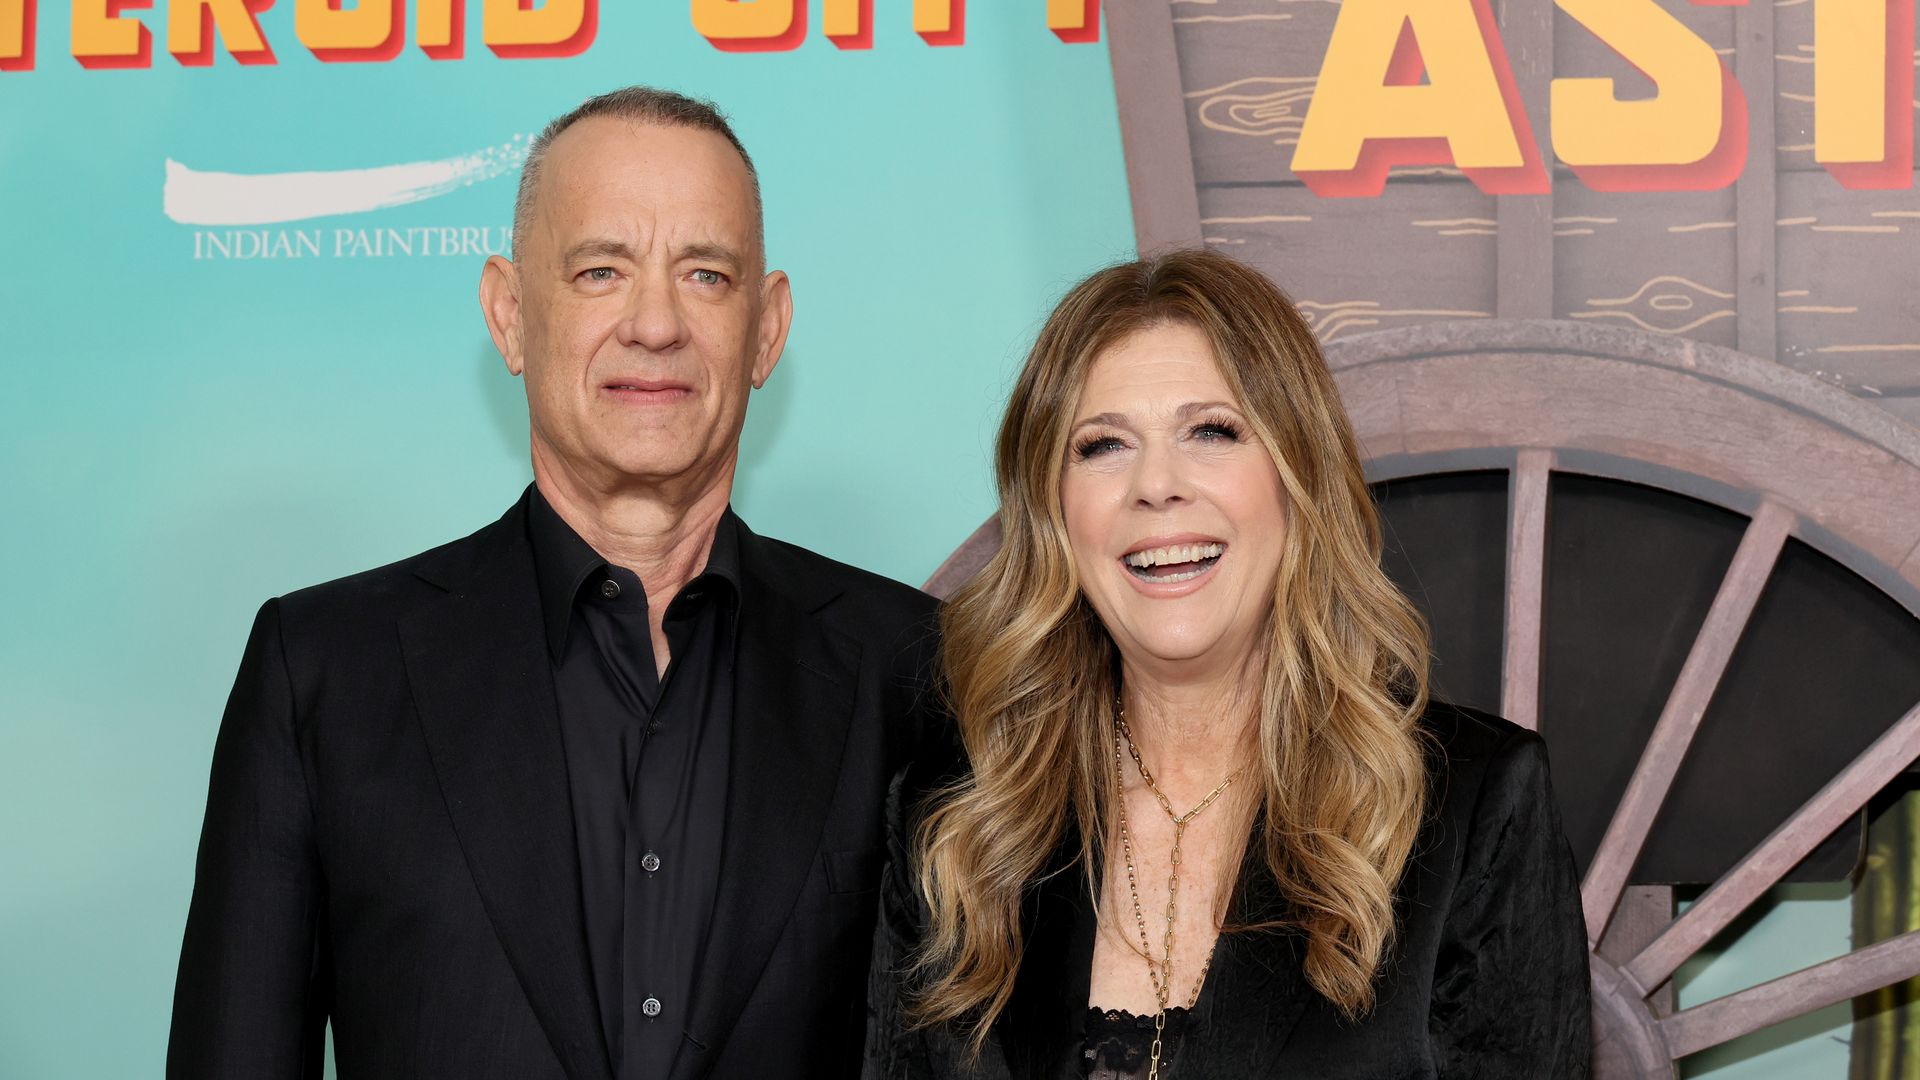 Carley is related to Tom Hanks through Rita Wilson